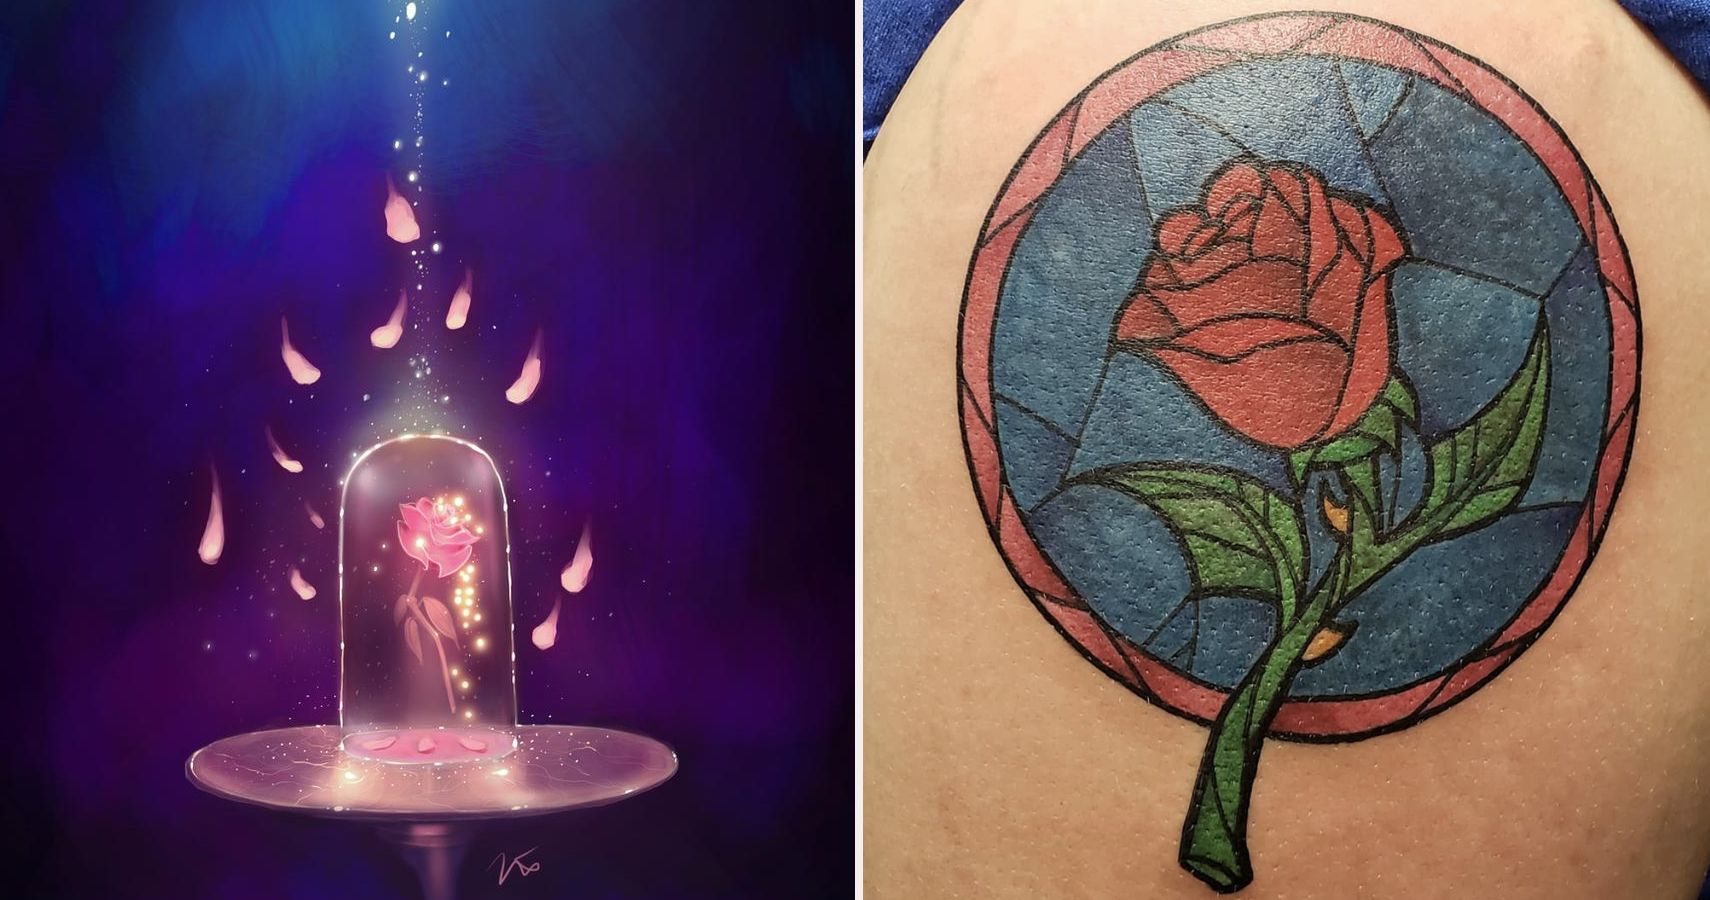 10 Best Fan Art/Tattoos Of The Beauty And The Beast Rose